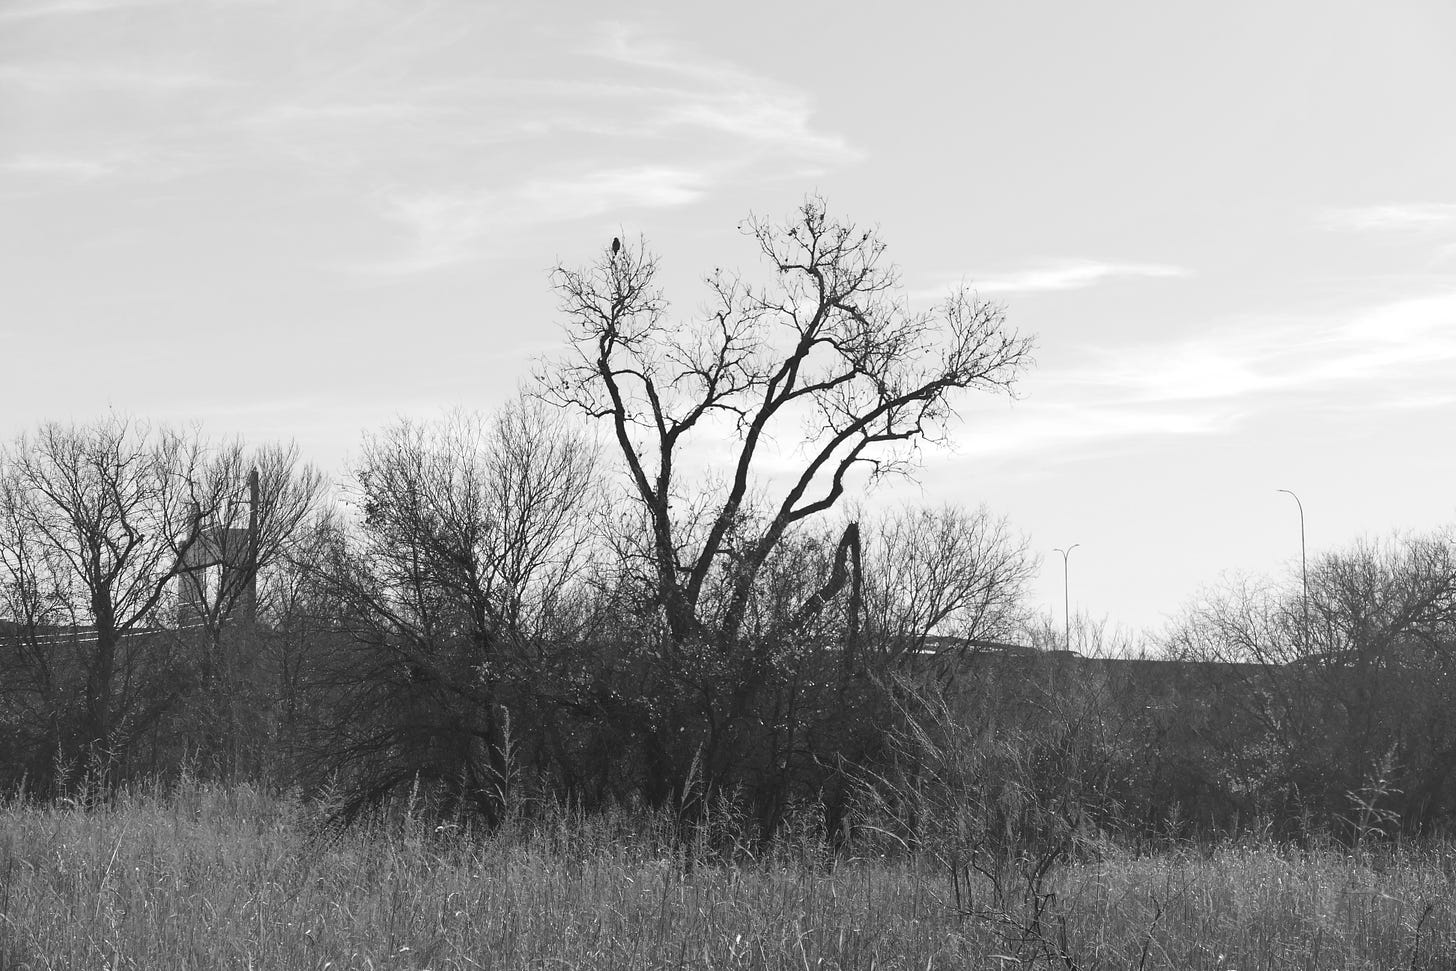 Black and white photo of a haw silhouetted in a bare tree, freeway bridge and street lamps visible above the treeline in the background